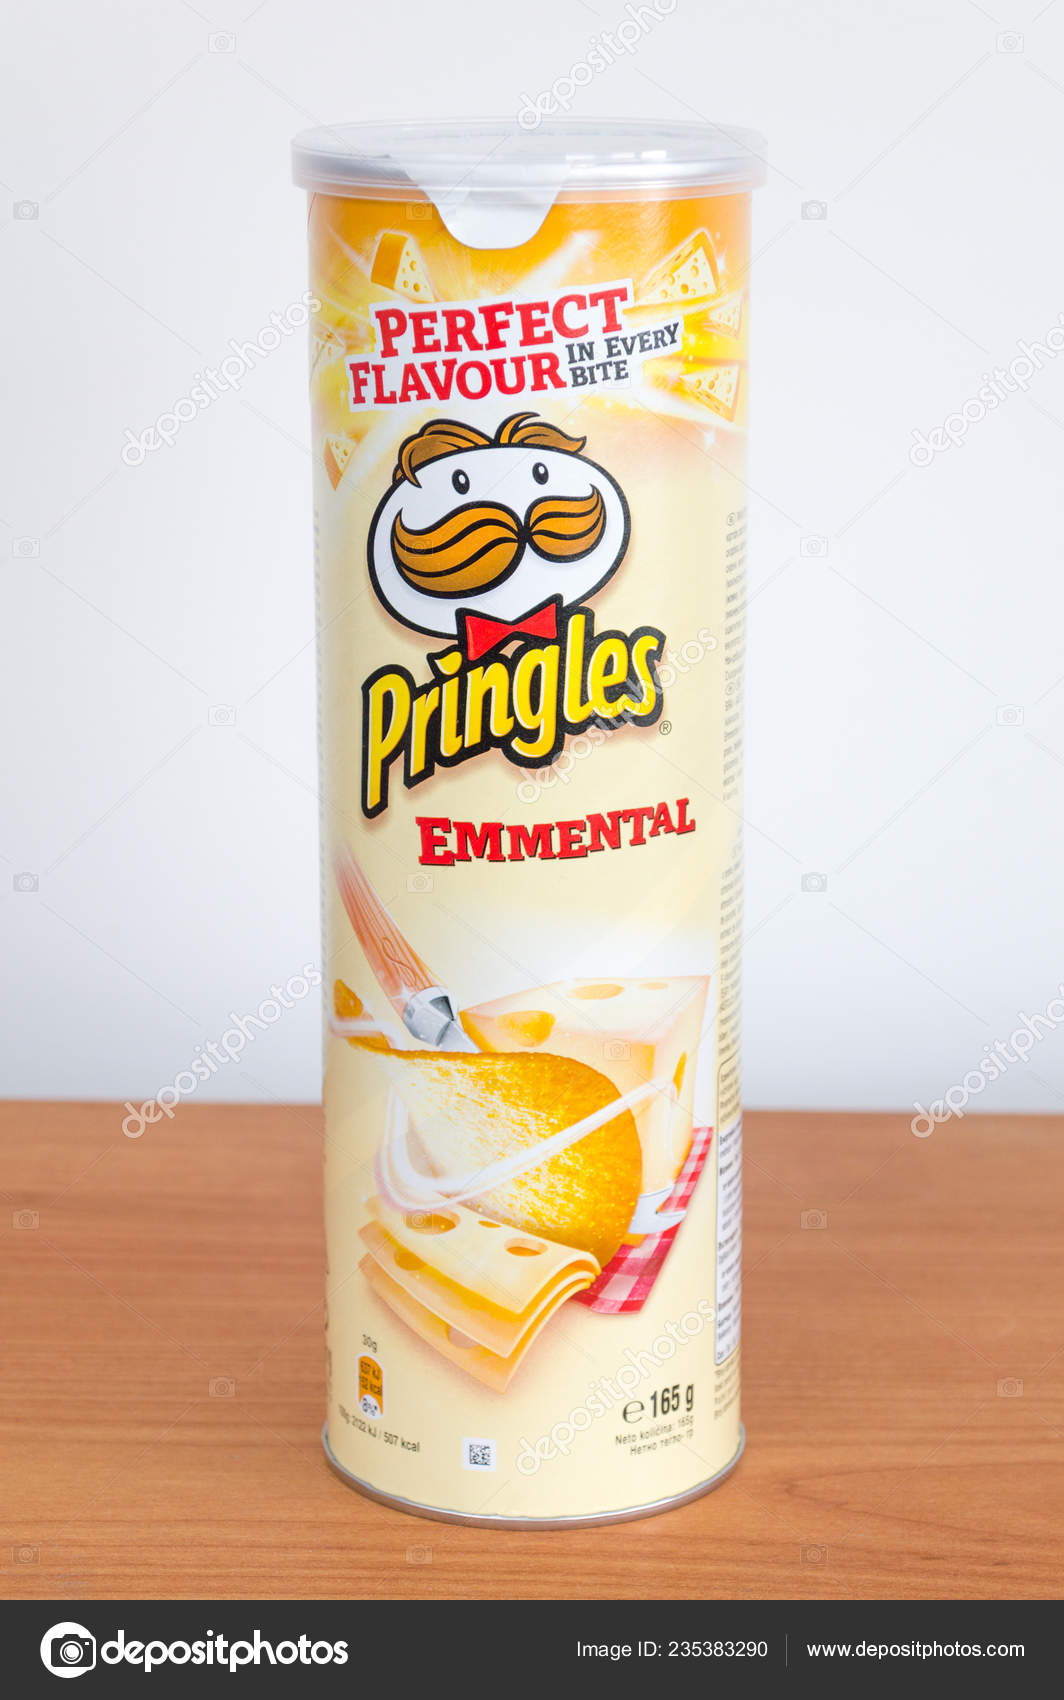 Emmental Pringles Pruszcz Gdanski Poland January 2019 Pringles Chips Emmental Cheese Flavoured Stock Editorial Photo C Robson90 235383290,How To Get Rid Of Black Ants At Home